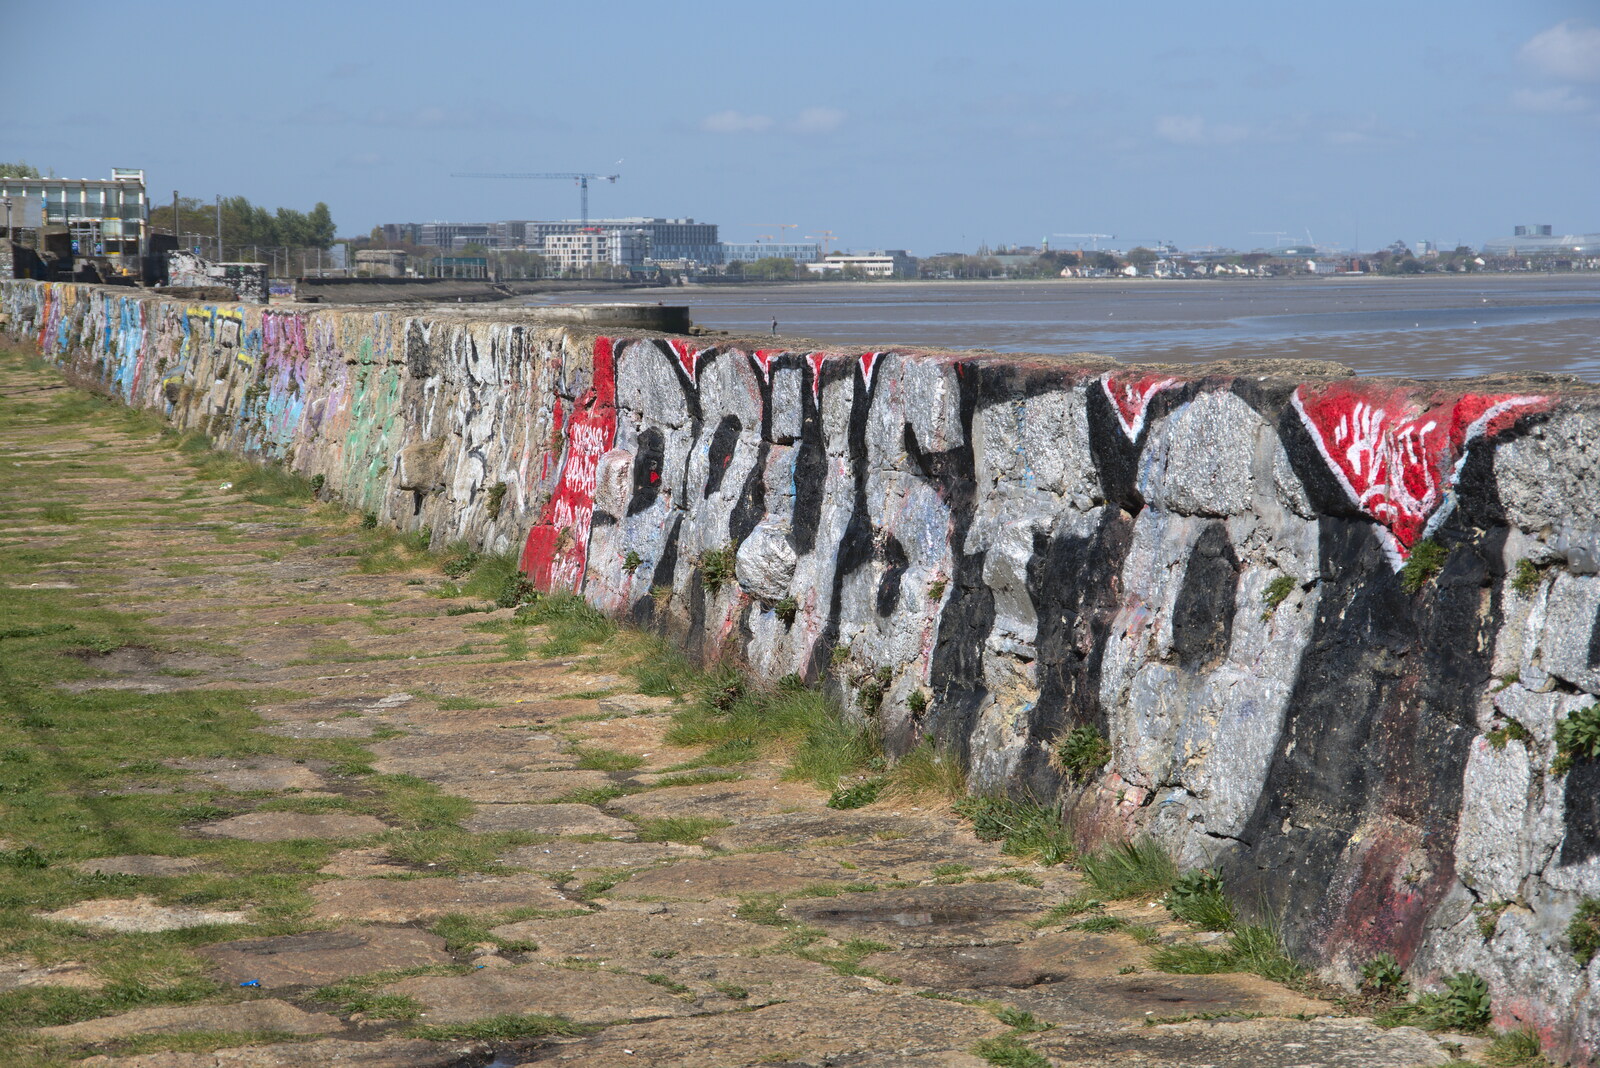 Blackrock North and South, Louth and County Dublin, Ireland - 23rd April 2022: More tags on a sea wall by the DART